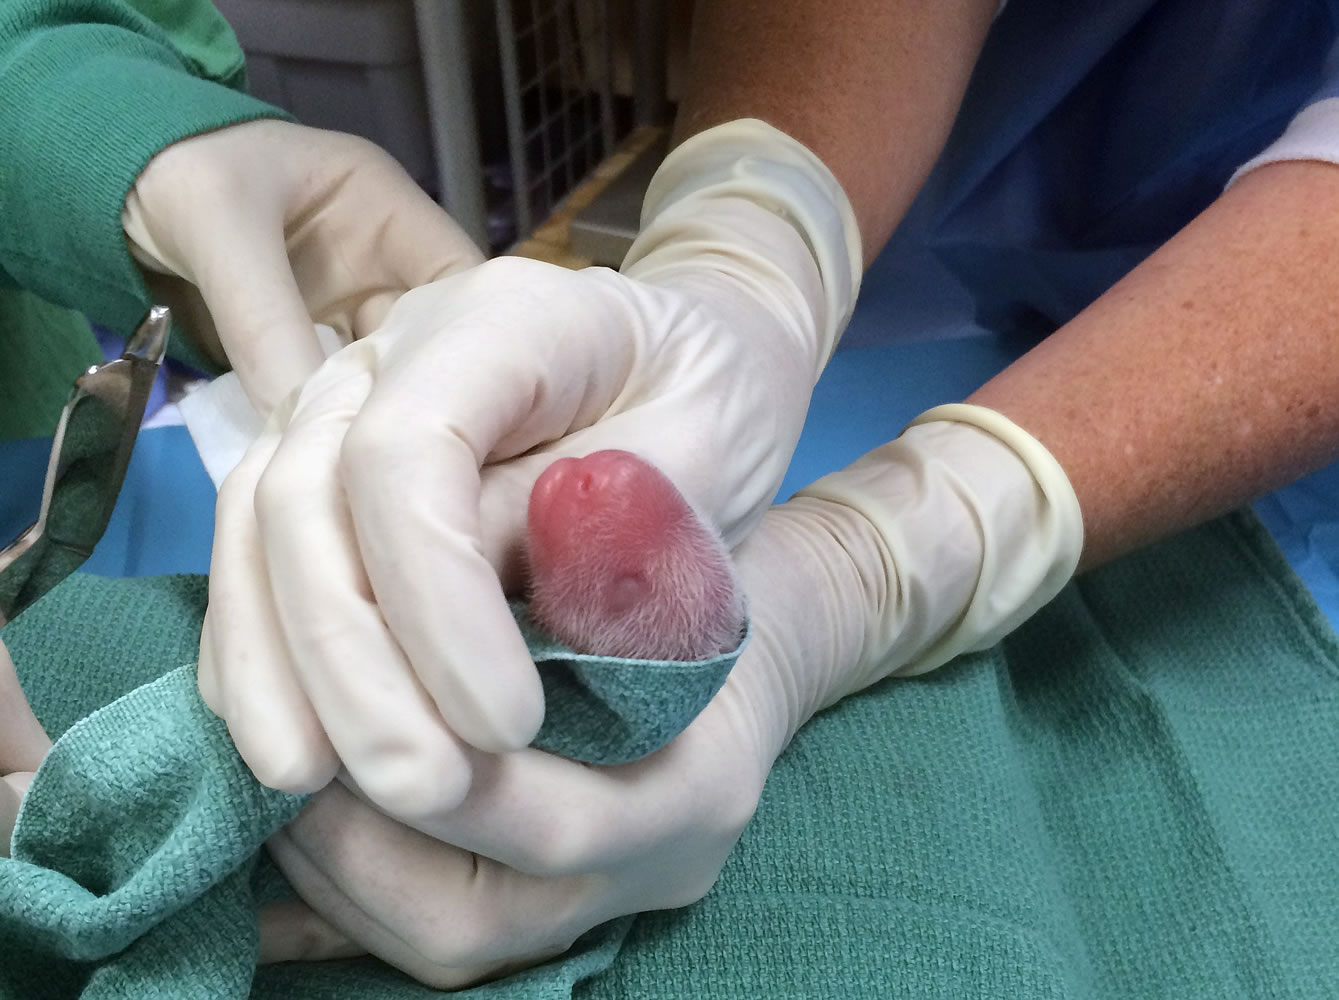 One of the giant panda cubs is examined by veterinarians after being born at Smithsonian's National Zoo on Saturday in Washington.